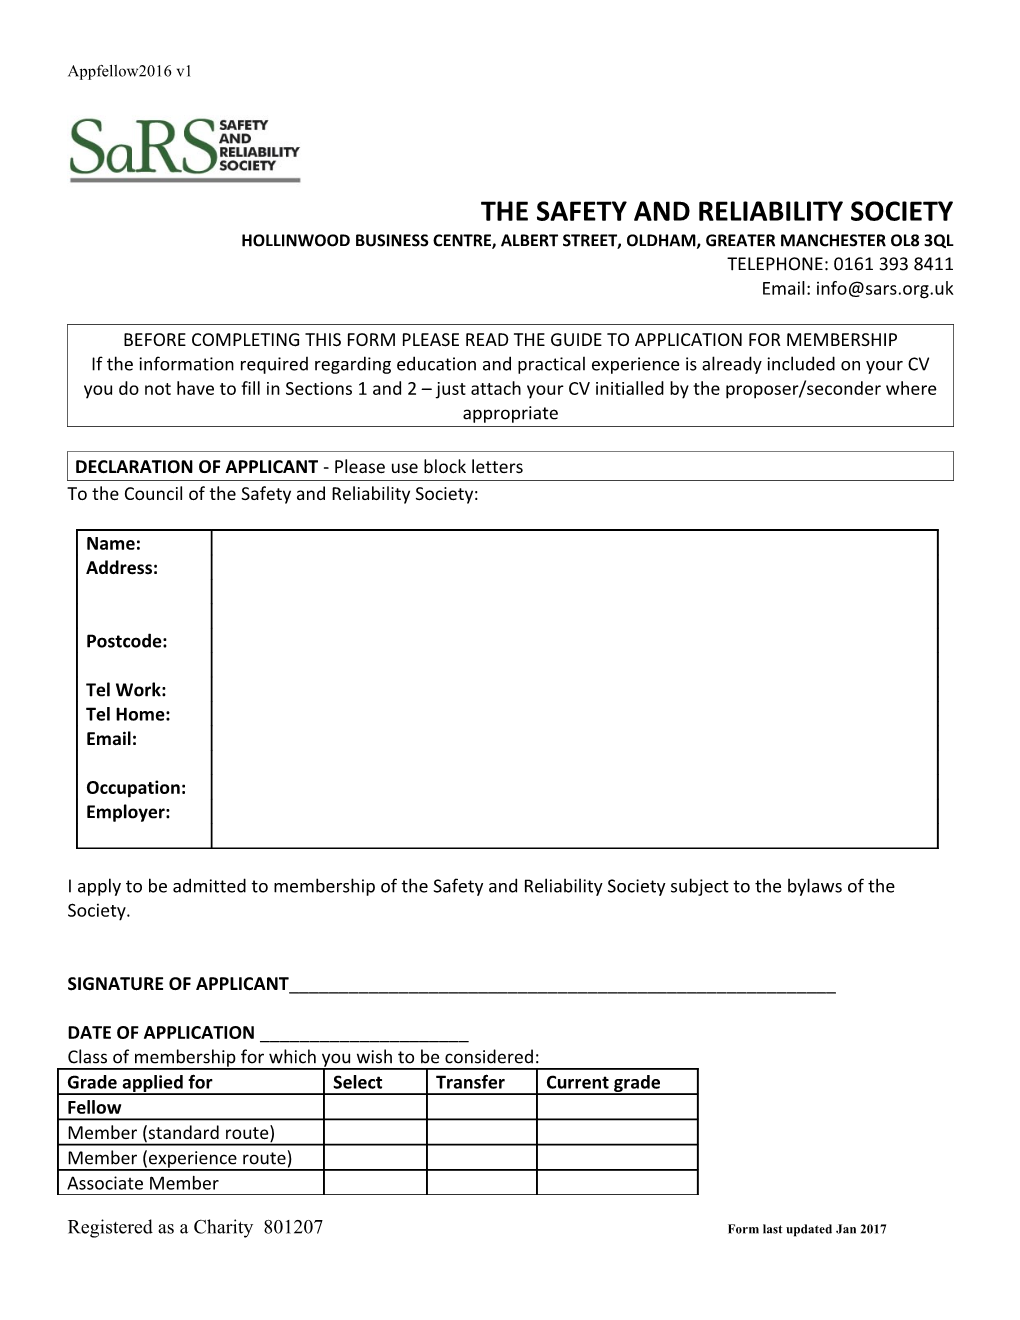 The Safety and Reliability Society